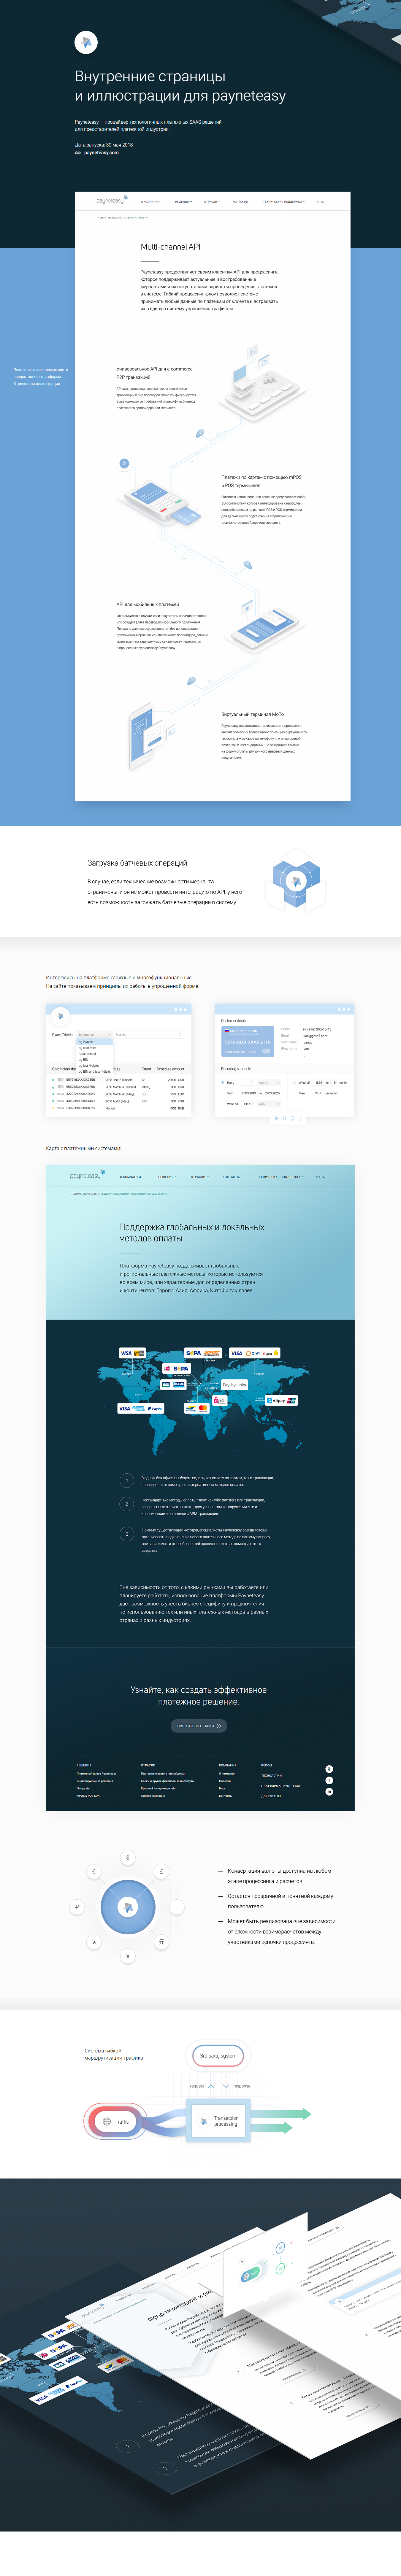 Internal pages and illustrations for Payneteasy